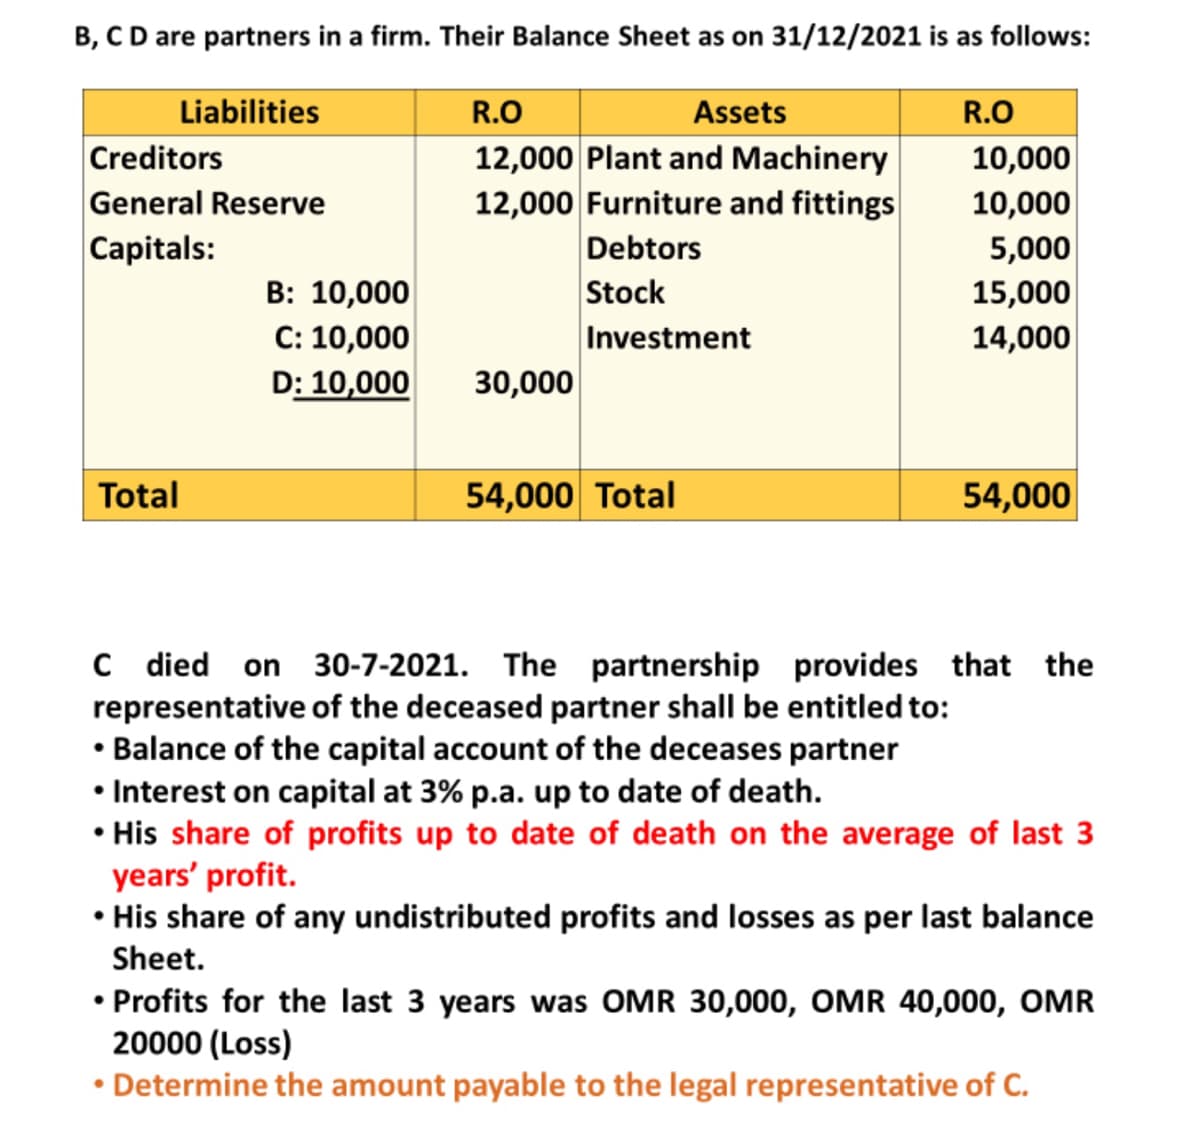 B, C D are partners in a firm. Their Balance Sheet as on 31/12/2021 is as follows:
Liabilities
R.O
Assets
R.O
Creditors
10,000
12,000 Plant and Machinery
12,000 Furniture and fittings
General Reserve
10,000
Capitals:
Debtors
5,000
B: 10,000
Stock
15,000
Investment
14,000
C: 10,000
D: 10,000
30,000
Total
54,000 Total
54,000
C died on 30-7-2021. The partnership provides that the
representative of the deceased partner shall be entitled to:
• Balance of the capital account of the deceases partner
• Interest on capital at 3% p.a. up to date of death.
• His share of profits up to date of death on the average of last 3
years' profit.
• His share of any undistributed profits and losses as per last balance
Sheet.
• Profits for the last 3 years was OMR 30,000, OMR 40,000, OMR
20000 (Loss)
• Determine the amount payable to the legal representative of C.